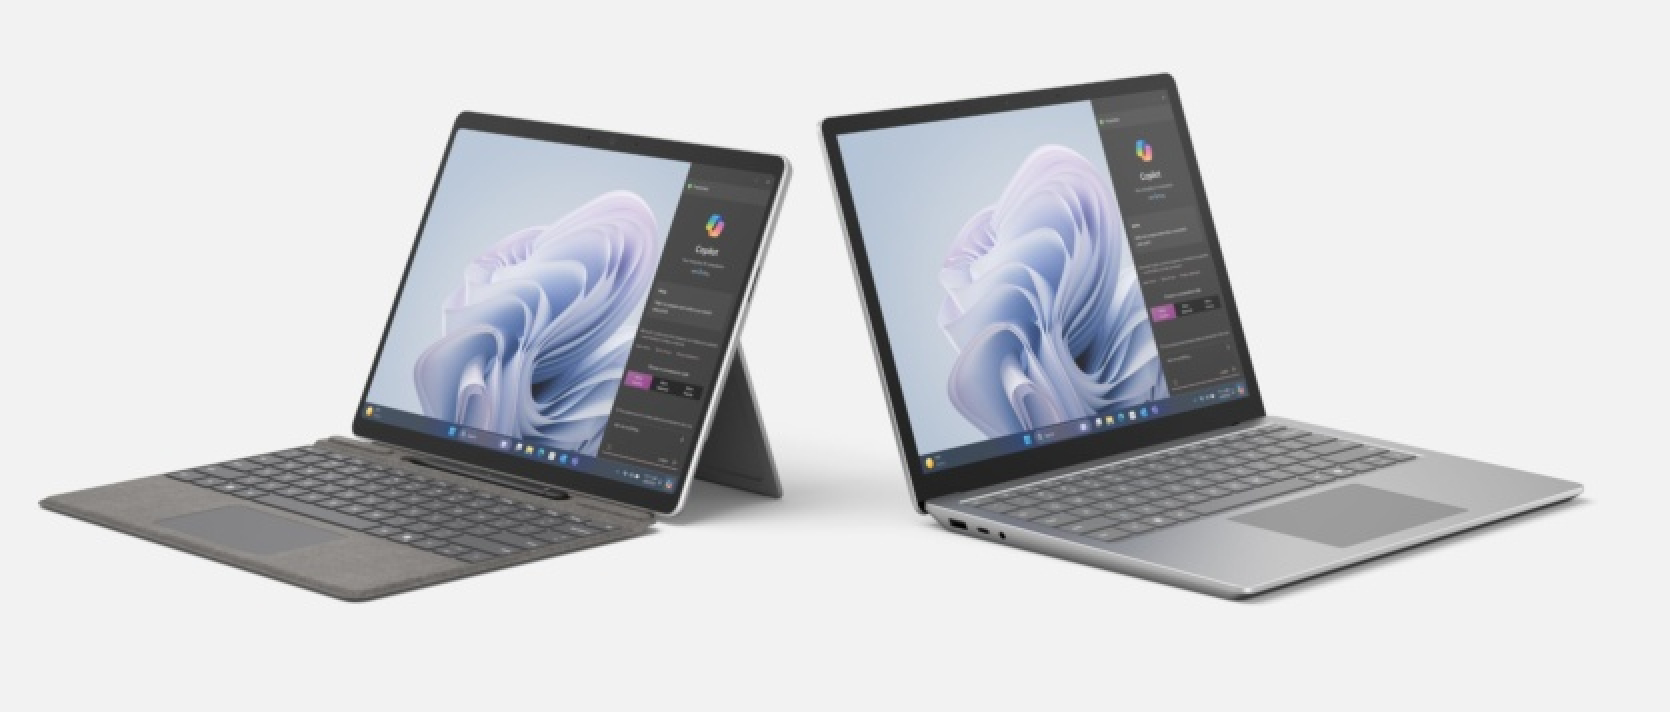 Microsoft launched Surface Pro 10 and Surface Laptop 6 priced from $1200 and Surface Pro Keyboard with improved keys